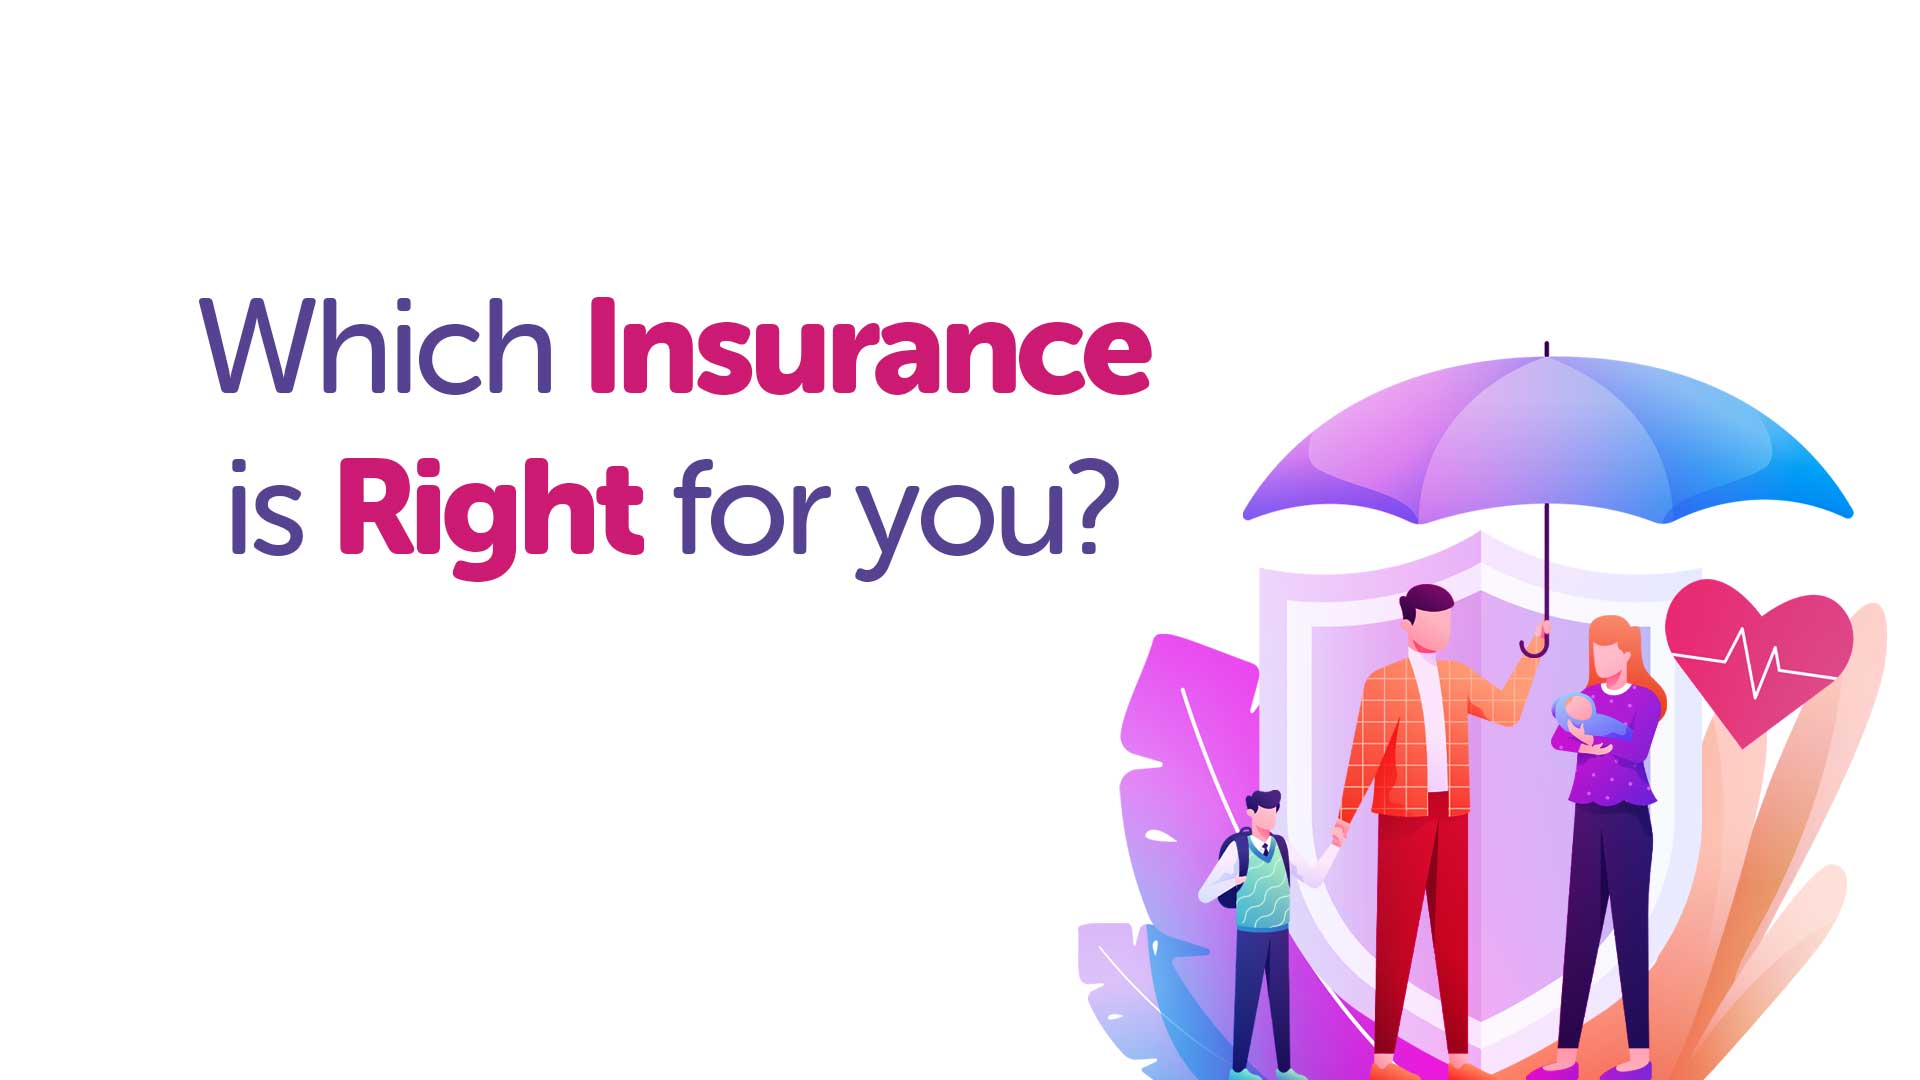 which insurance is right for you? | Cardiffmoneyman